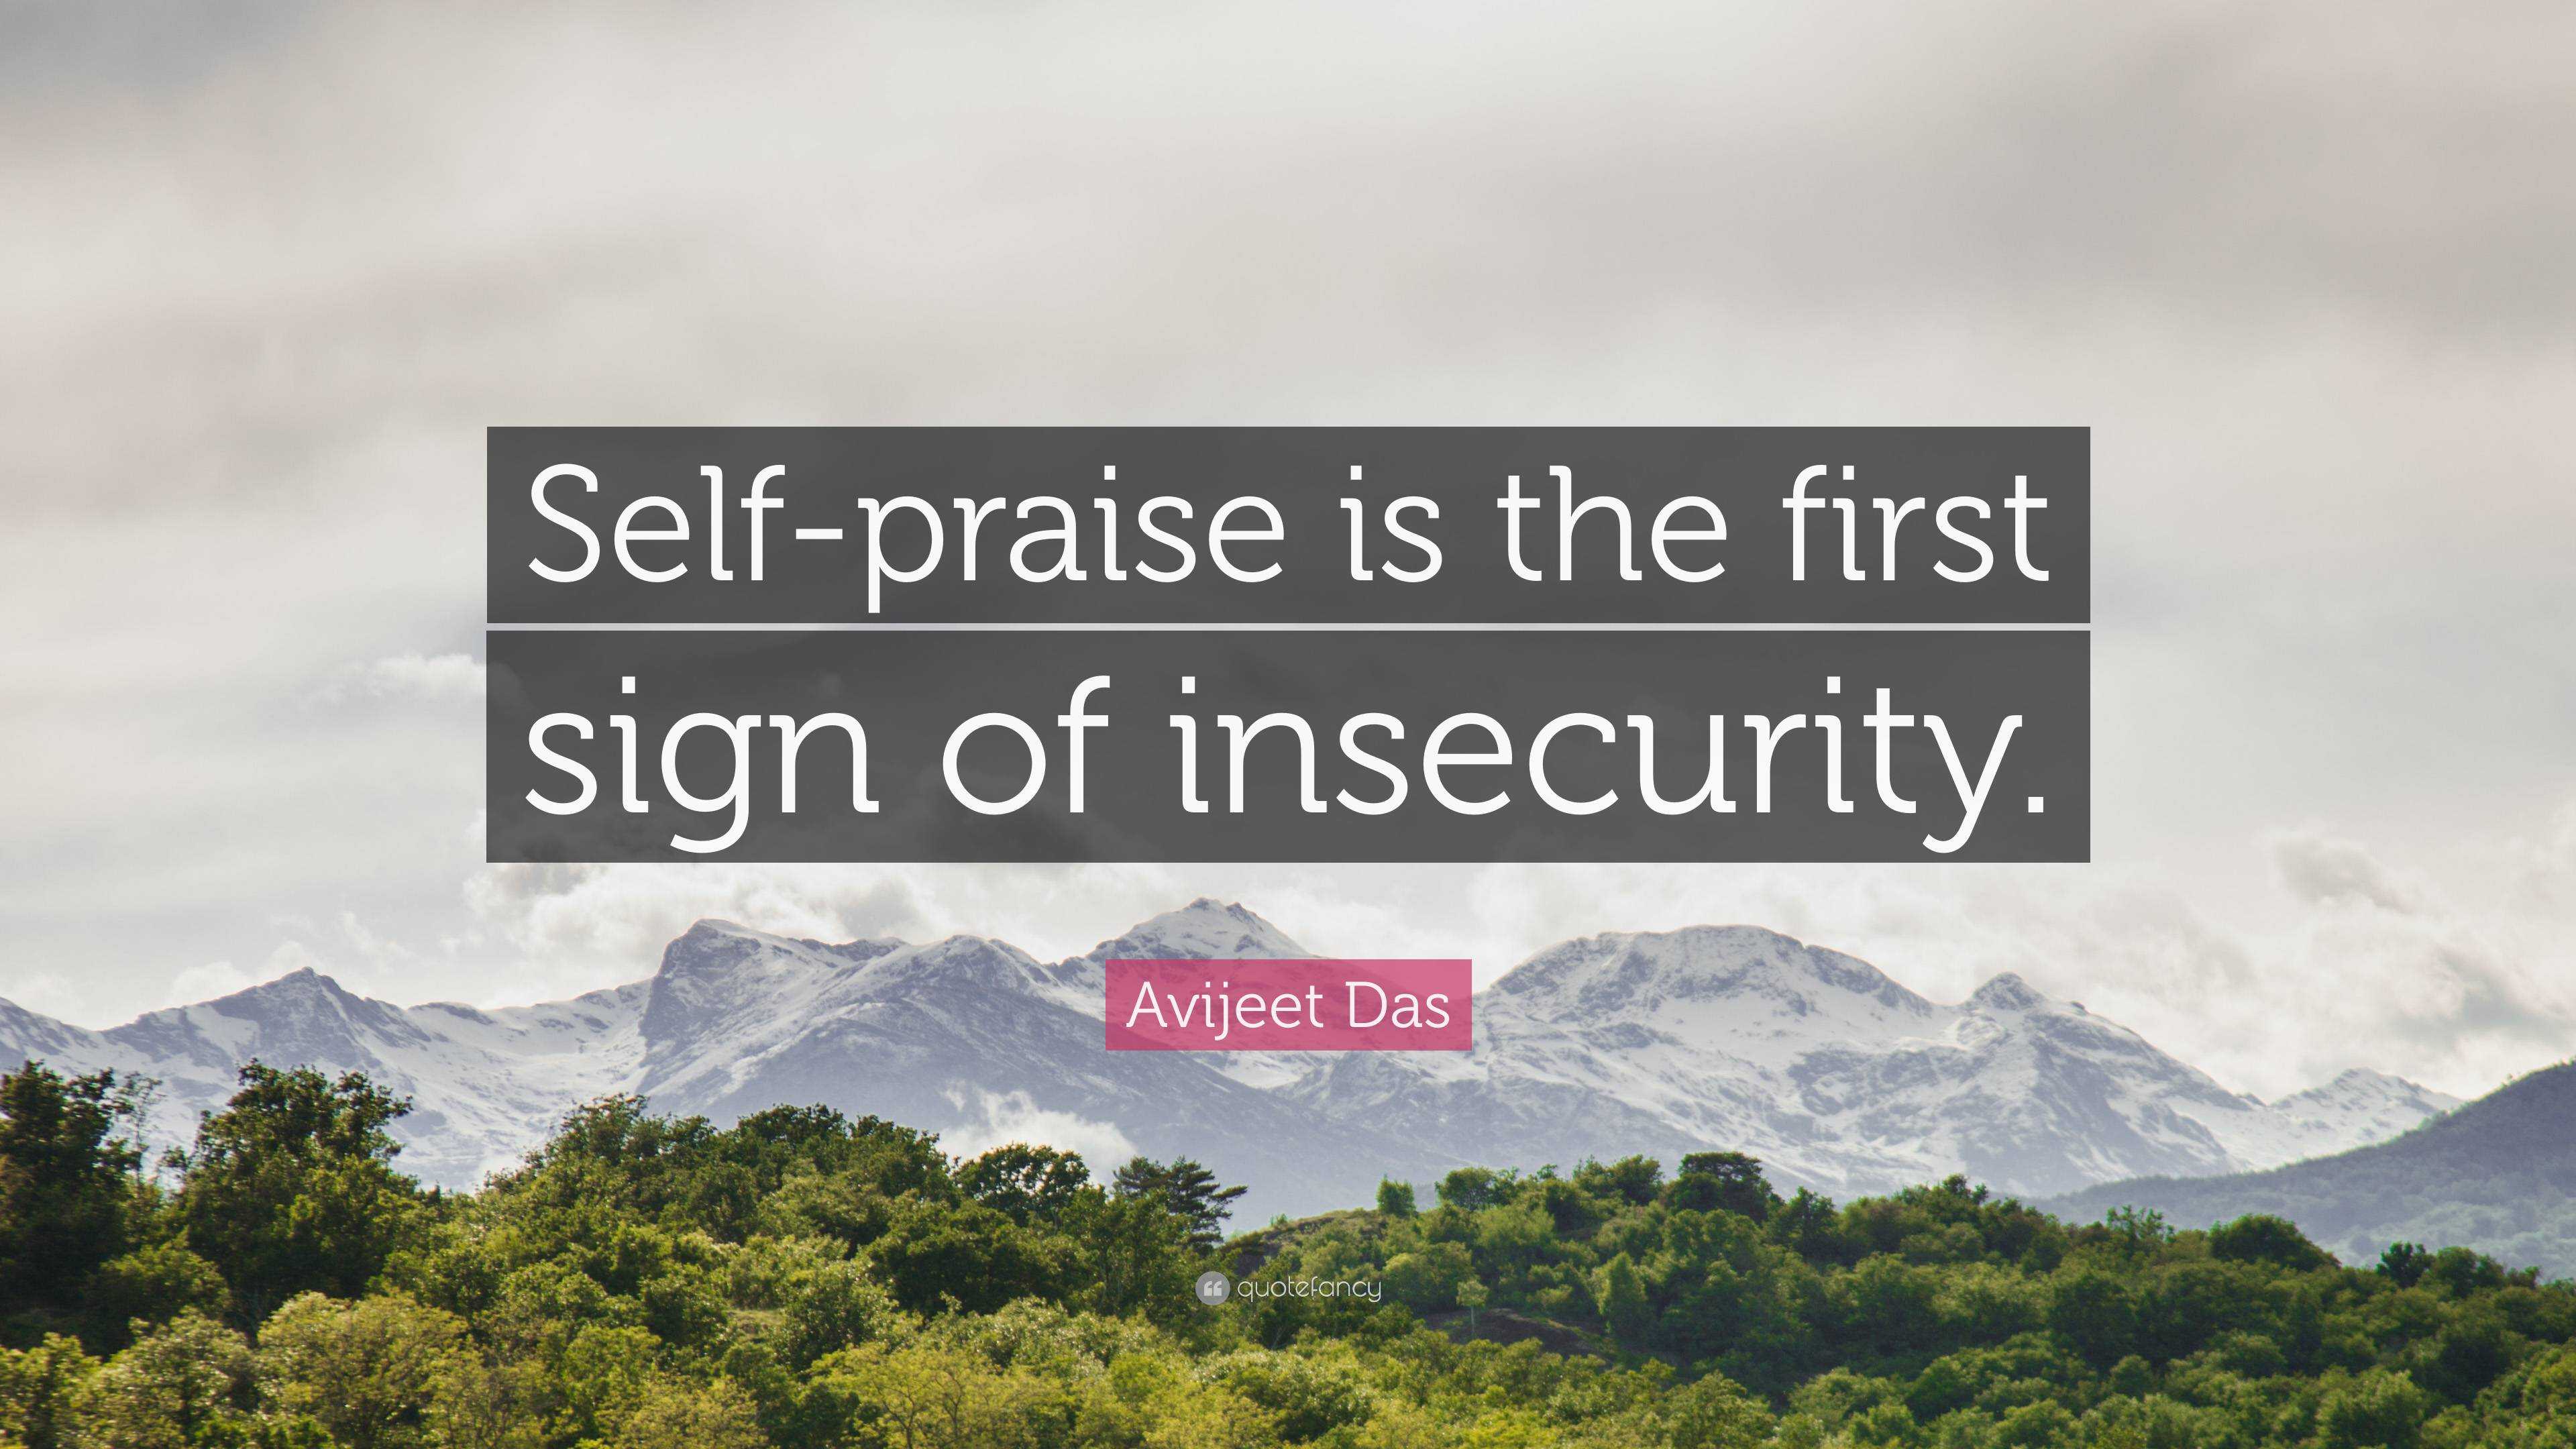 Avijeet Das Quote: “Self-praise is the first sign of insecurity.”